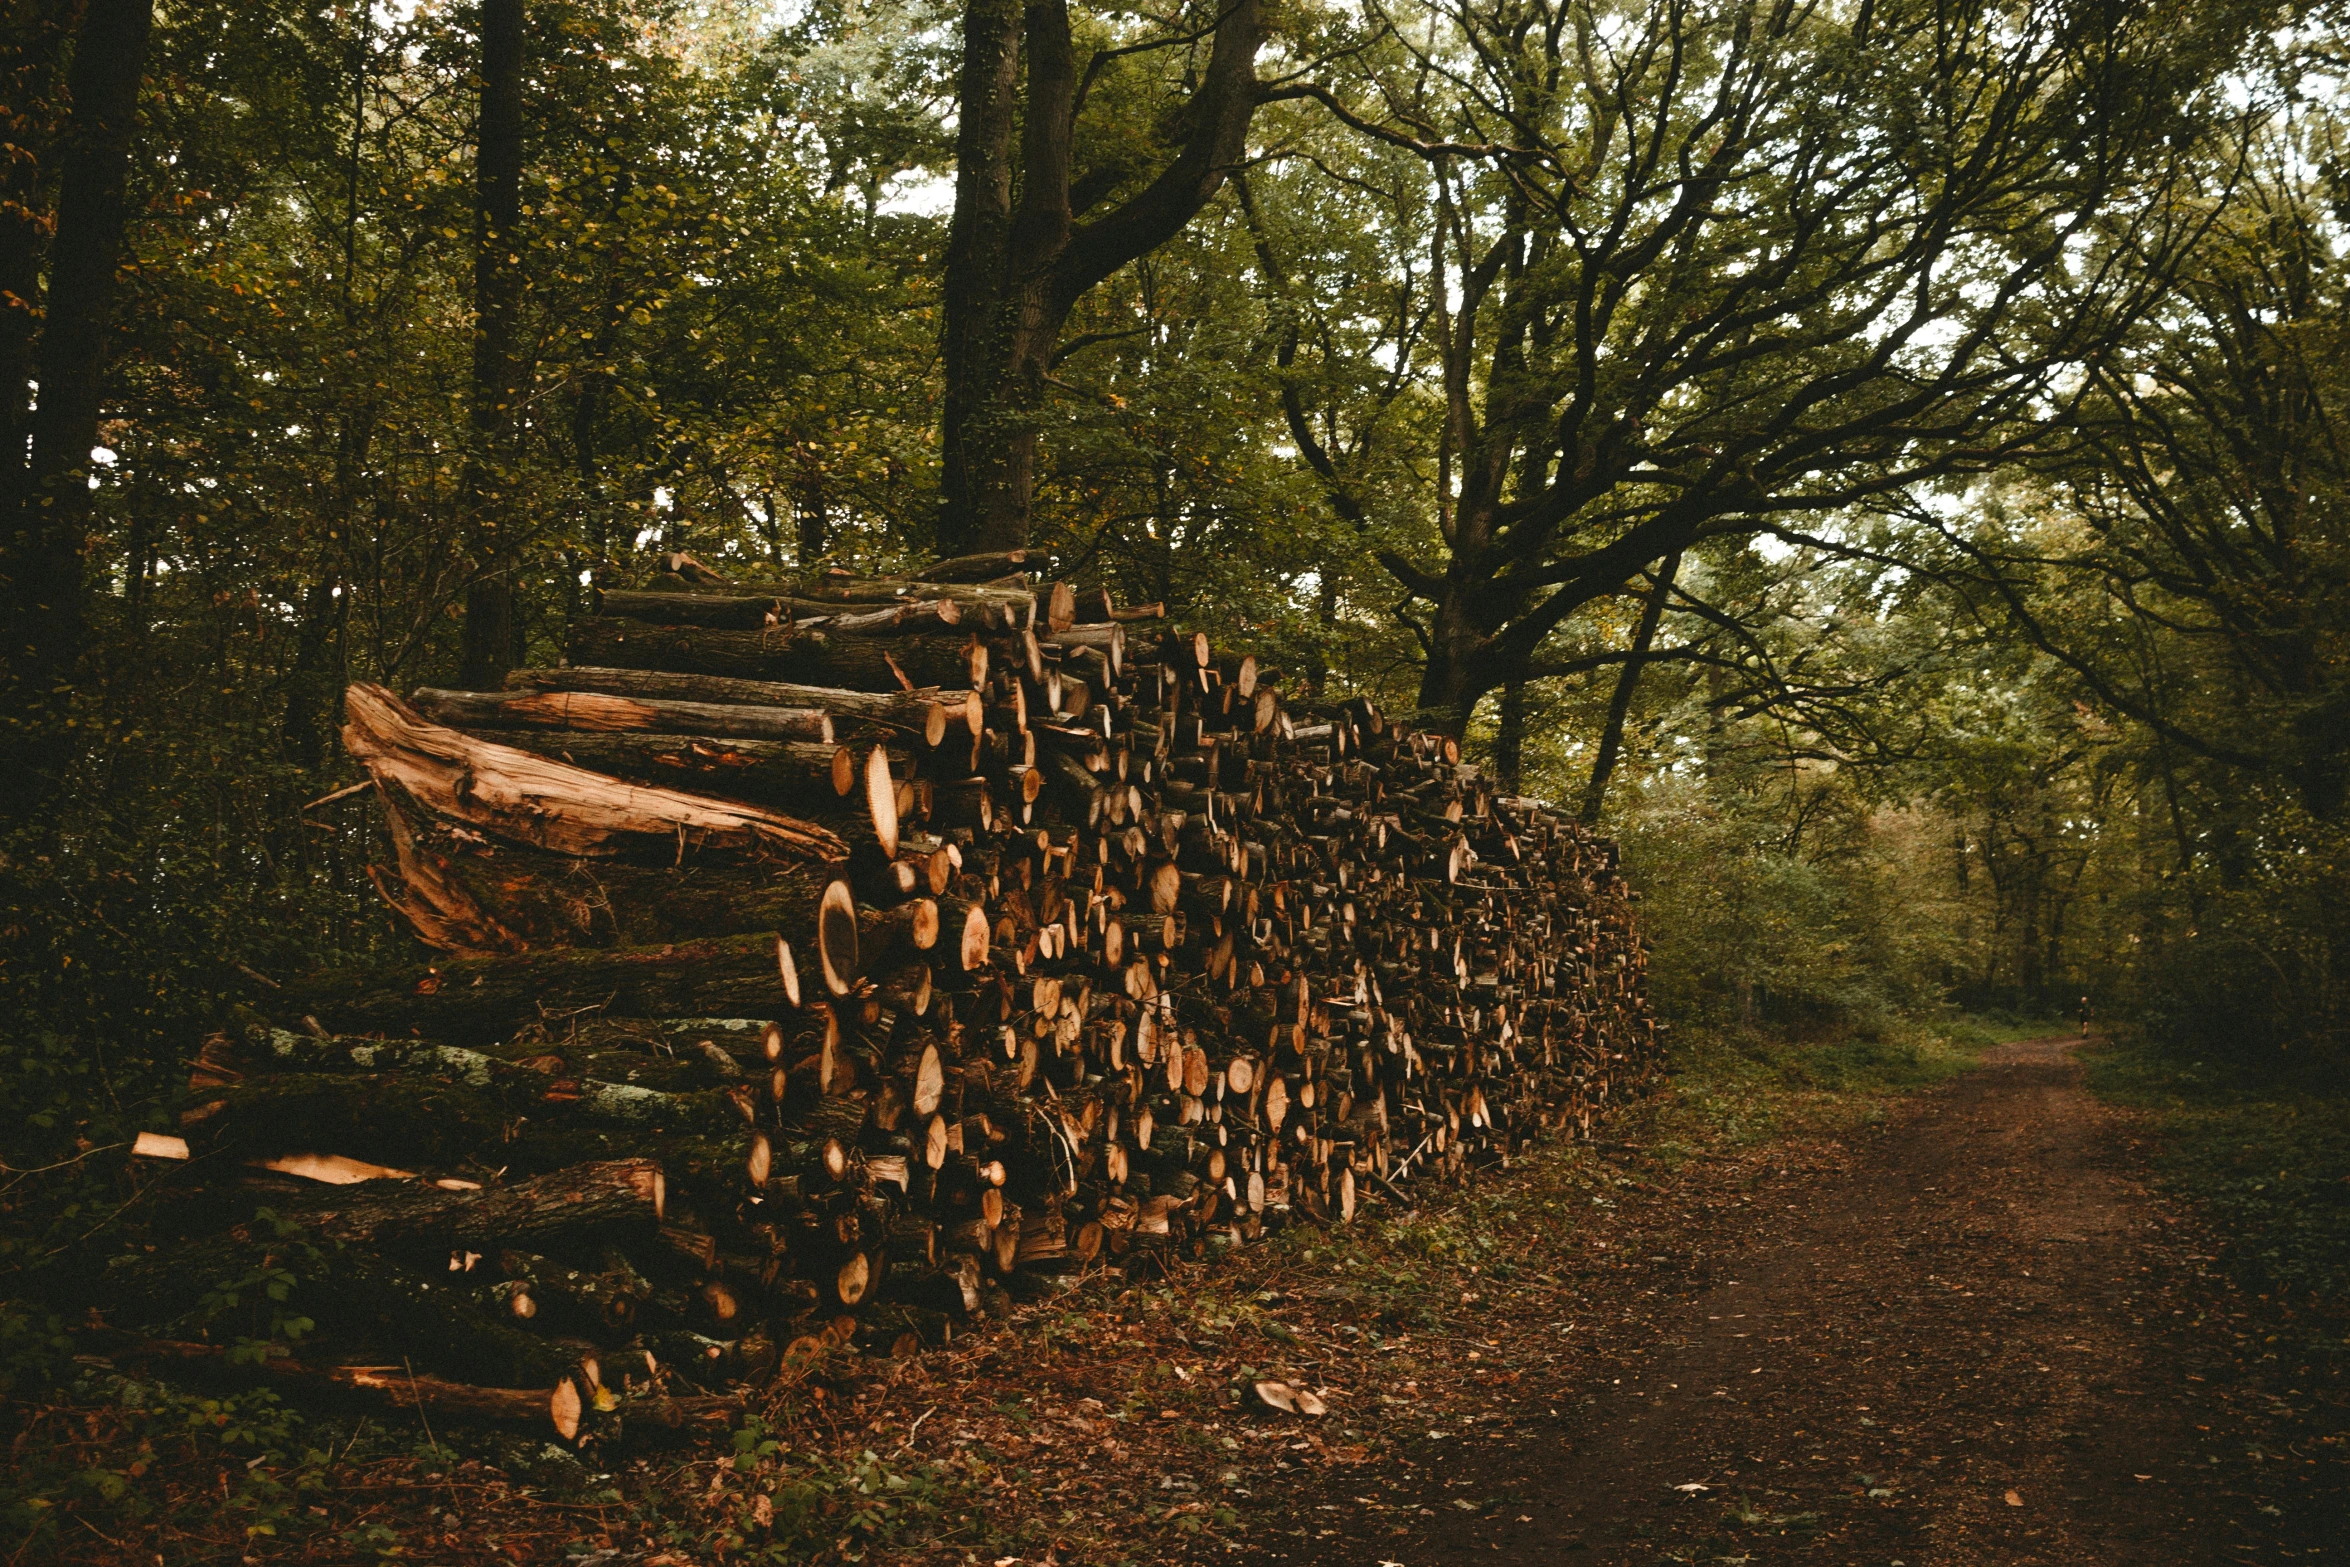 a pile of logs is shown in a wooded area